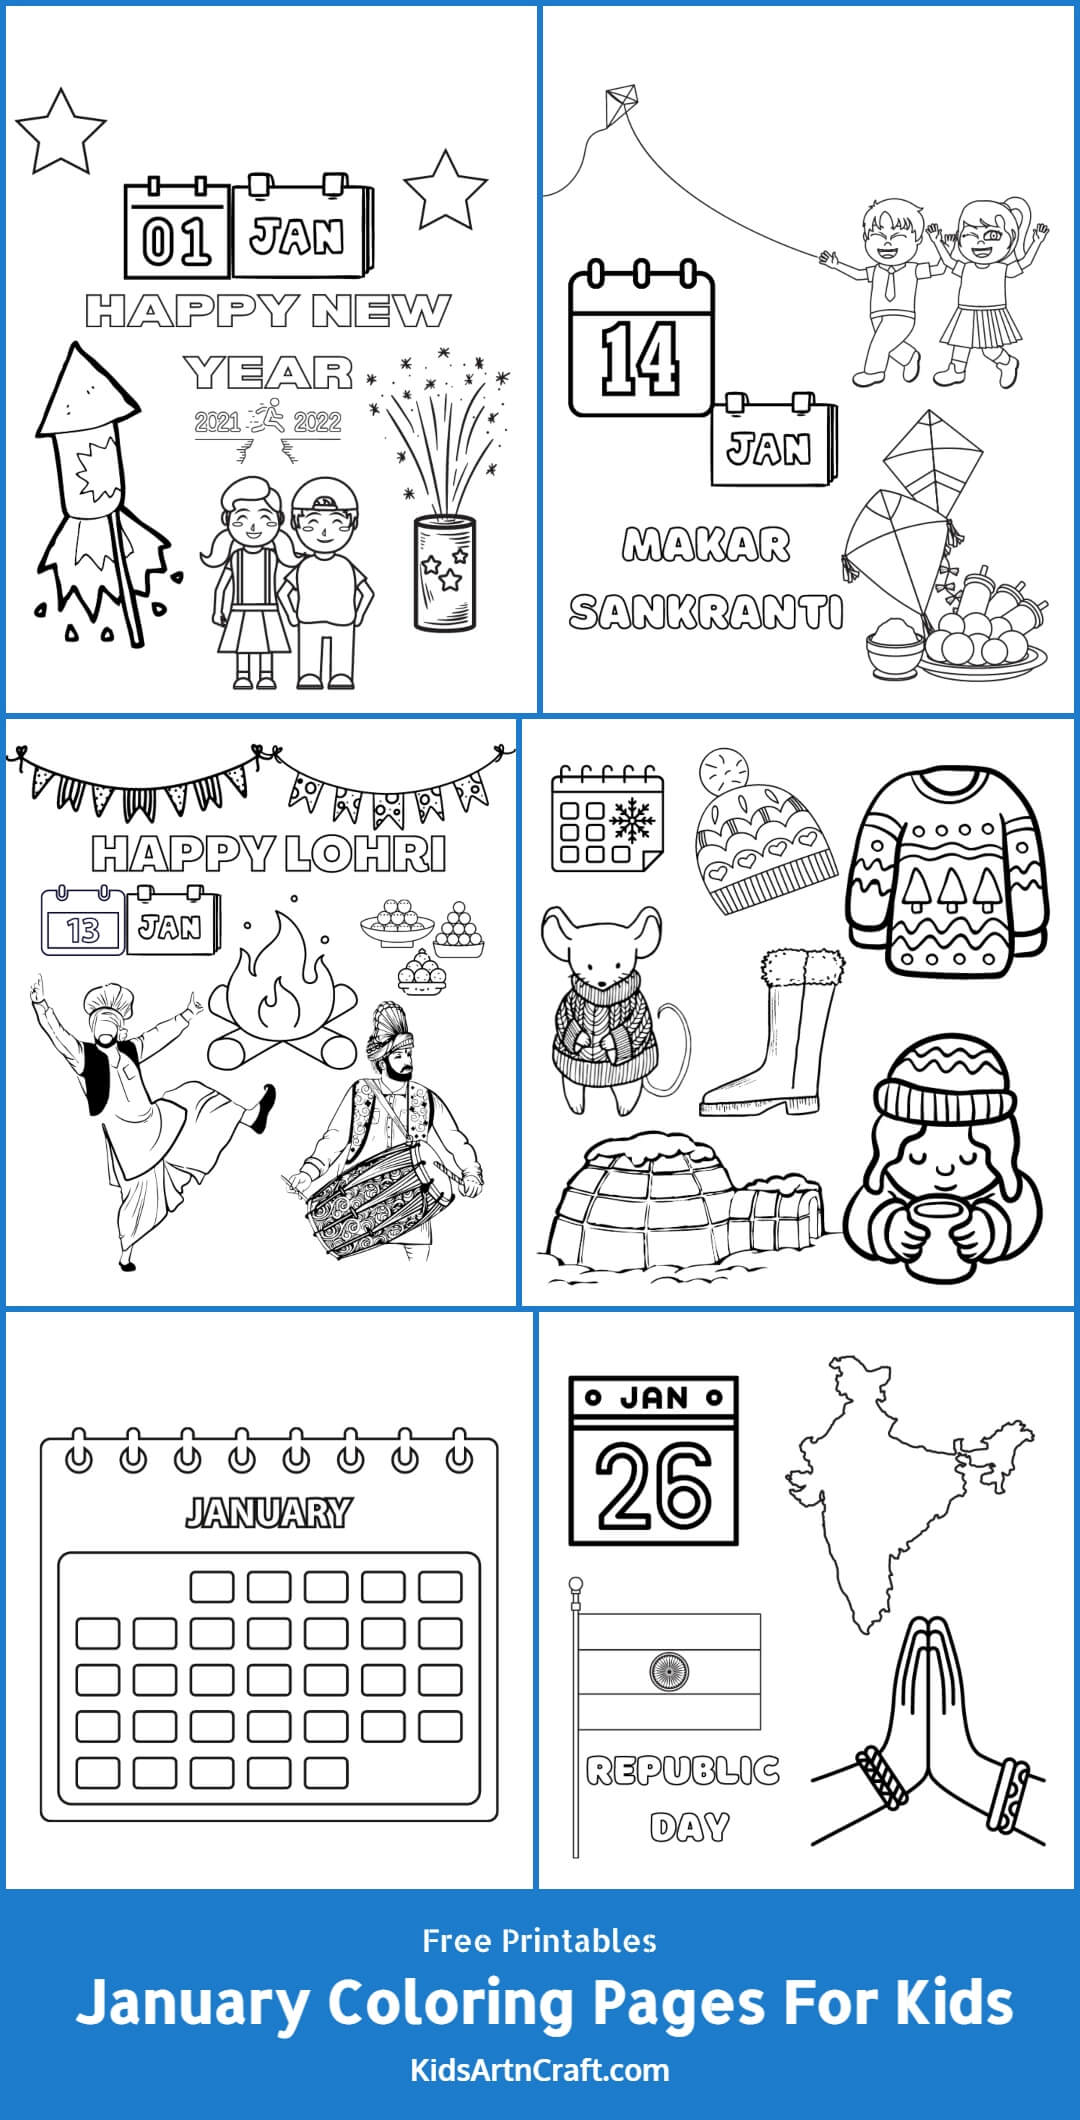 January Coloring Pages For Kids – Free Printables